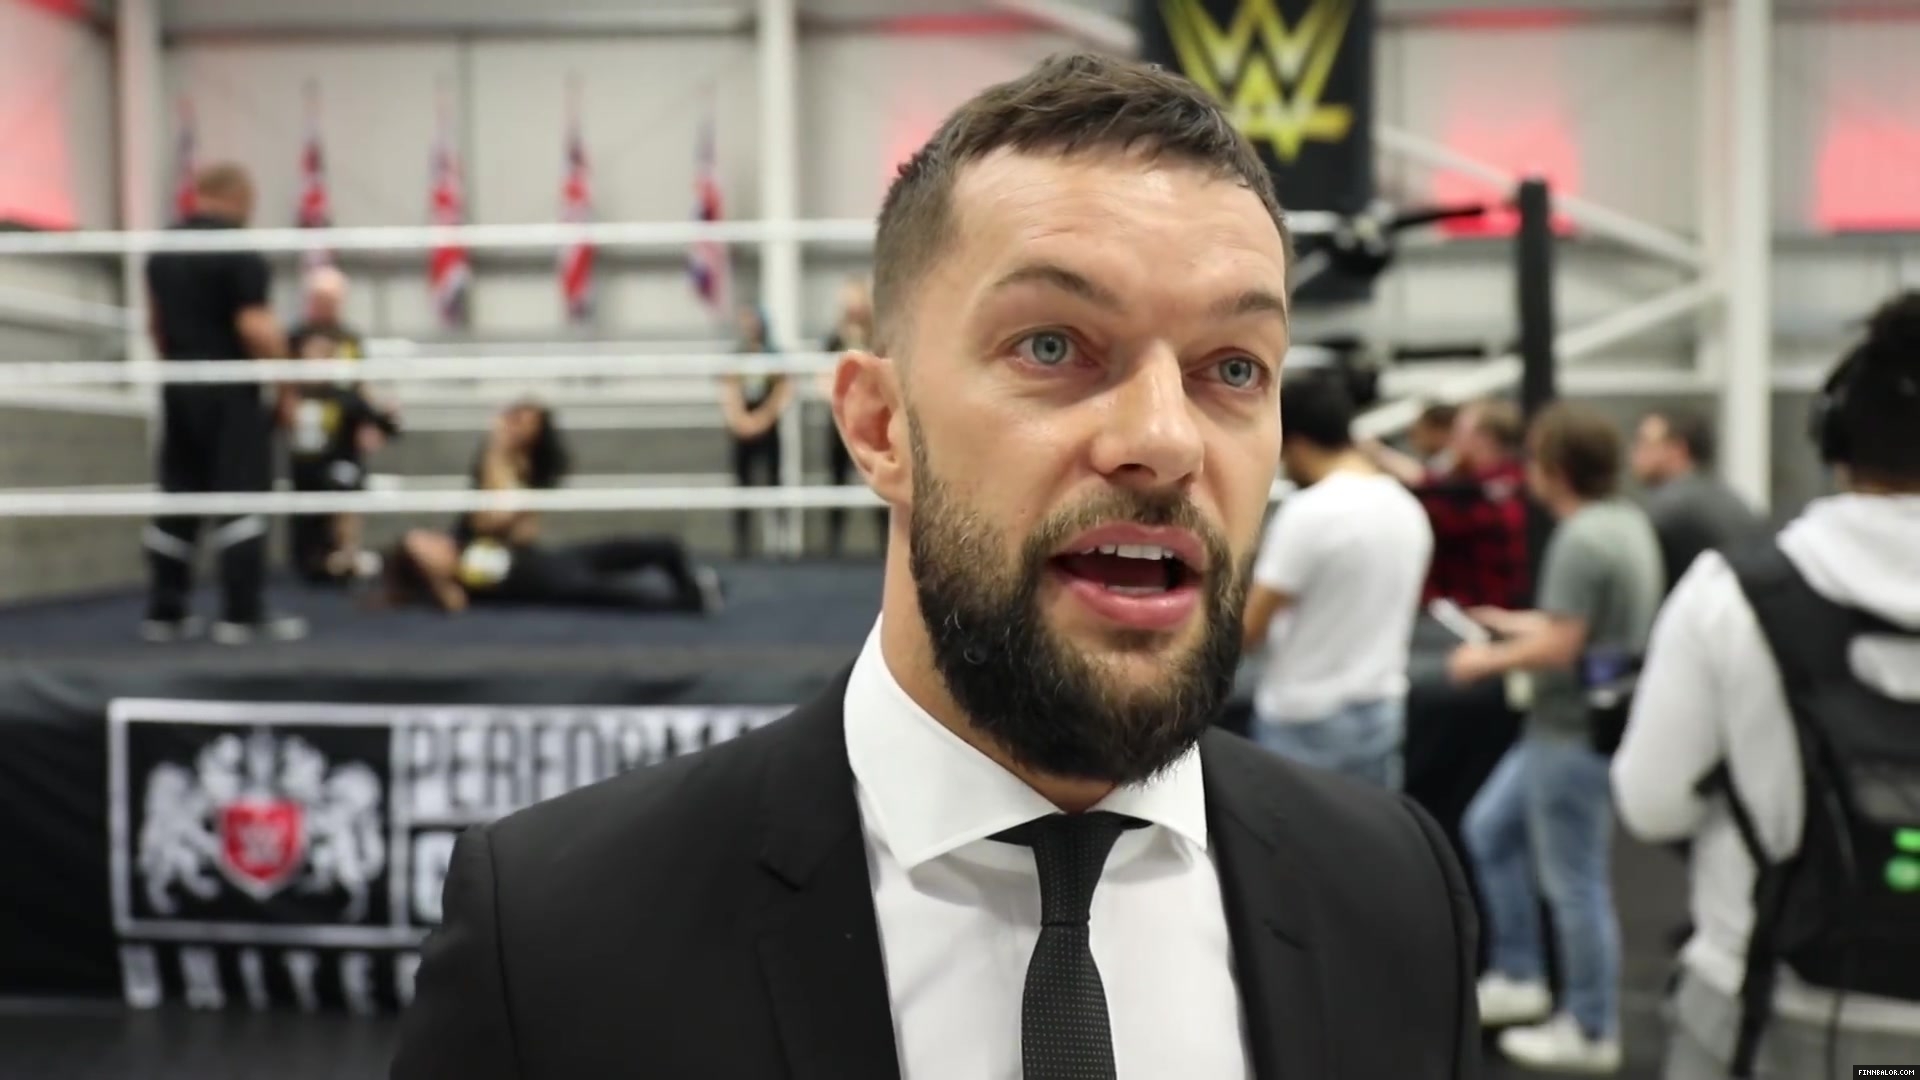 WWE_Superstar_FINN_BALOR_joins_MOUSTACHE_MOUNTAIN_at_the_opening_of_the_NXT_UK_PC_153.jpg